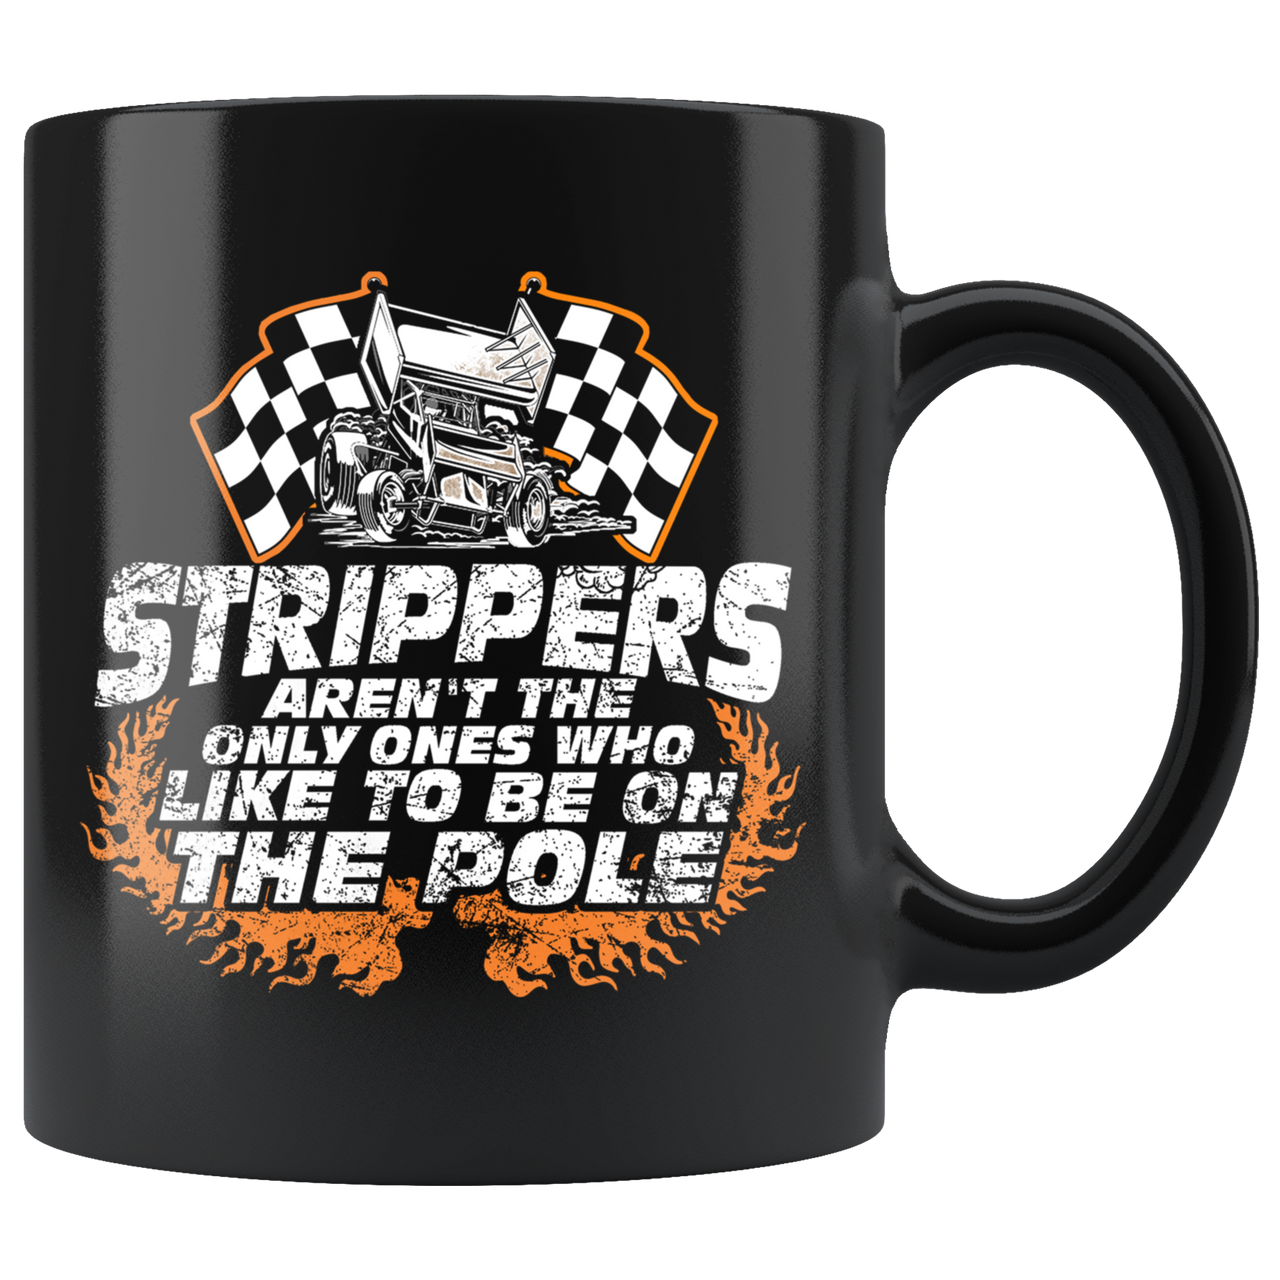 Strippers Aren't The Only Ones Who like To Be On Th Pool Sprint Car Mug!